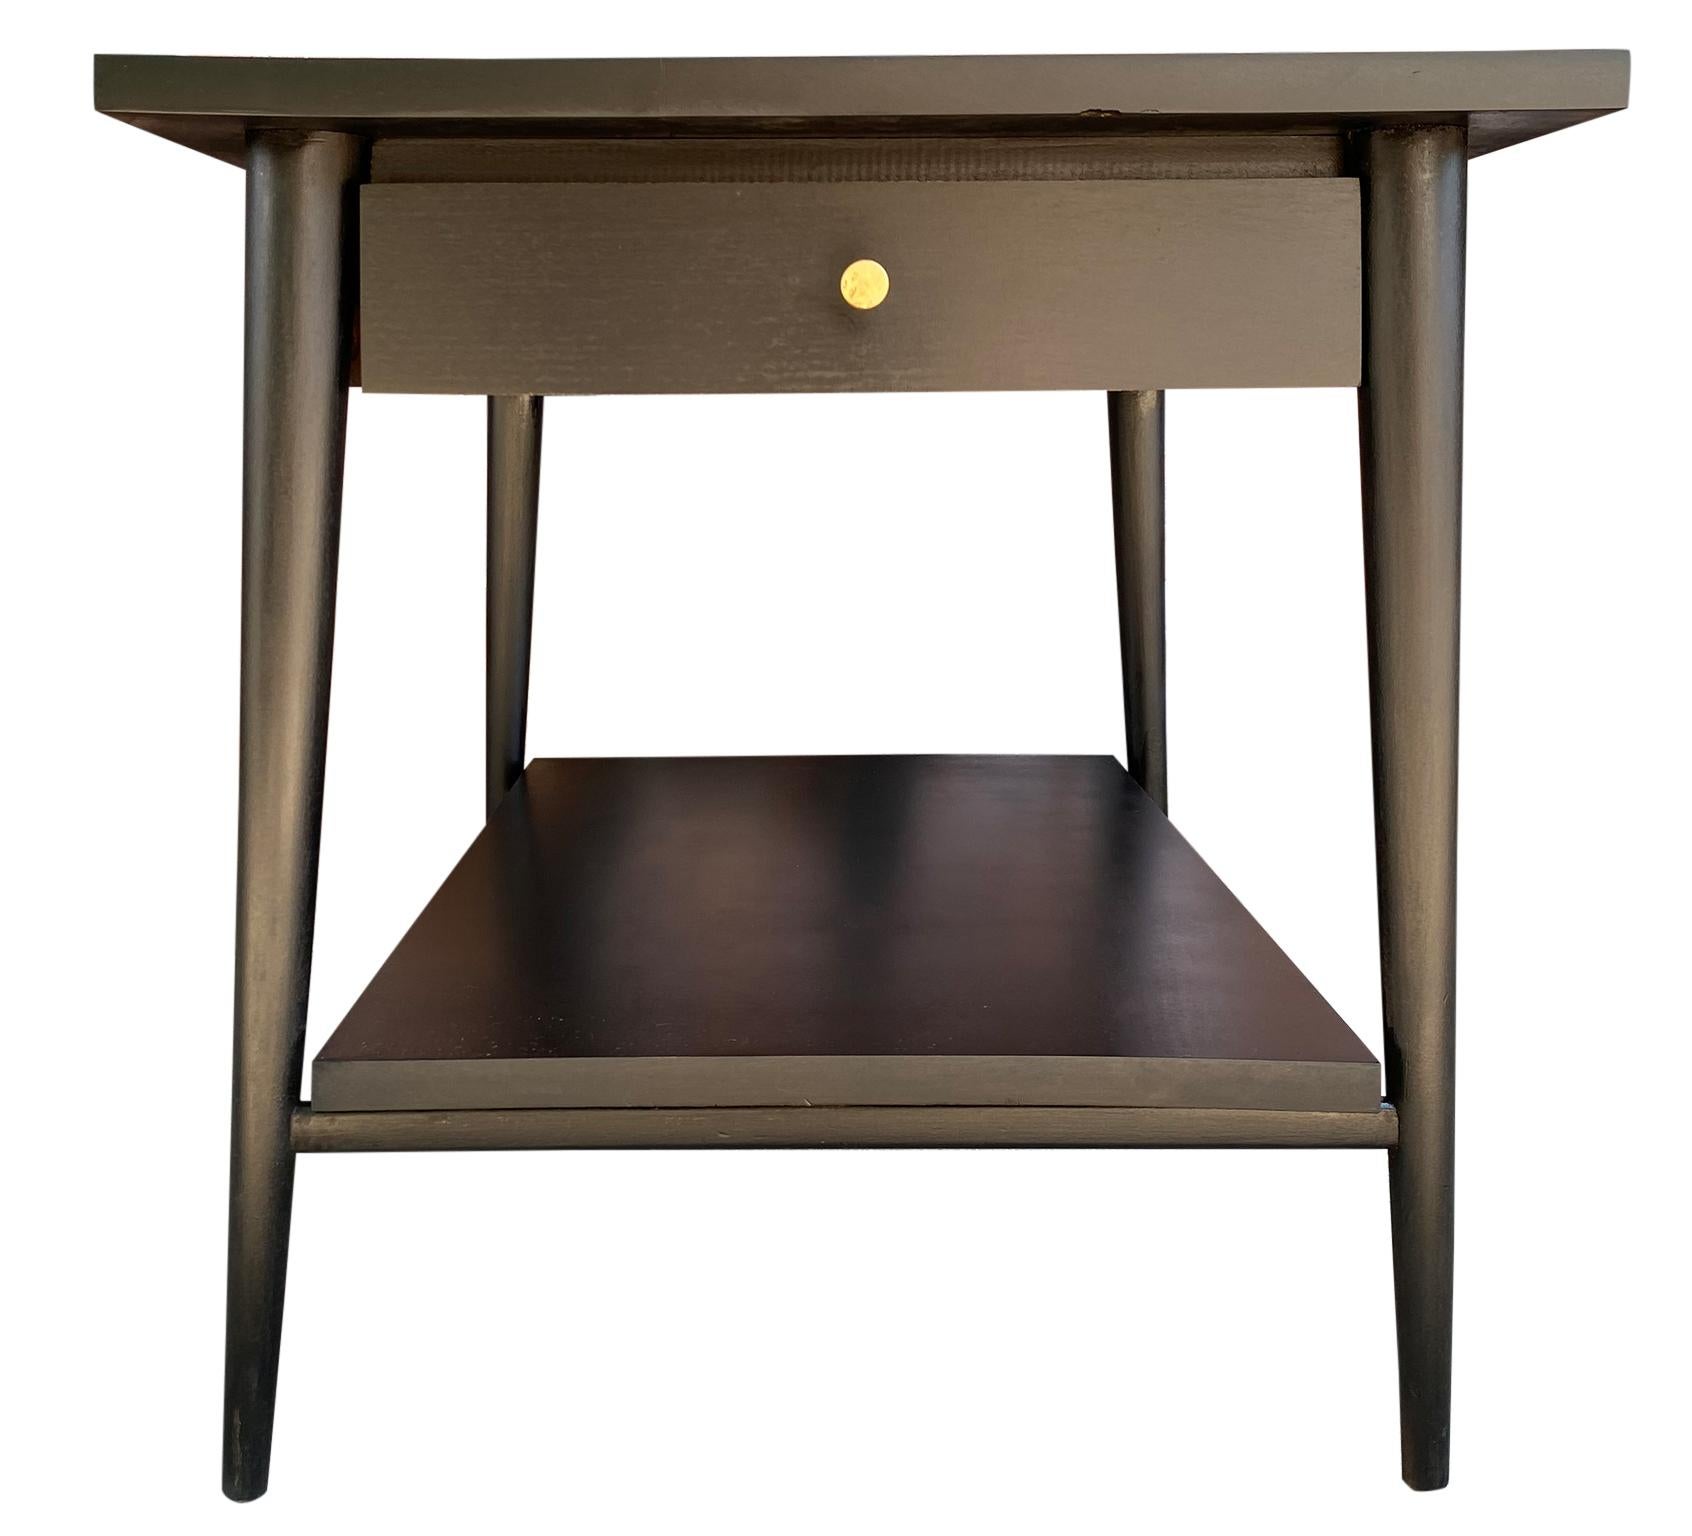 Midcentury Paul McCobb #1587 Nightstands Black Lacquer Brass Knobs End Tables In Good Condition For Sale In BROOKLYN, NY